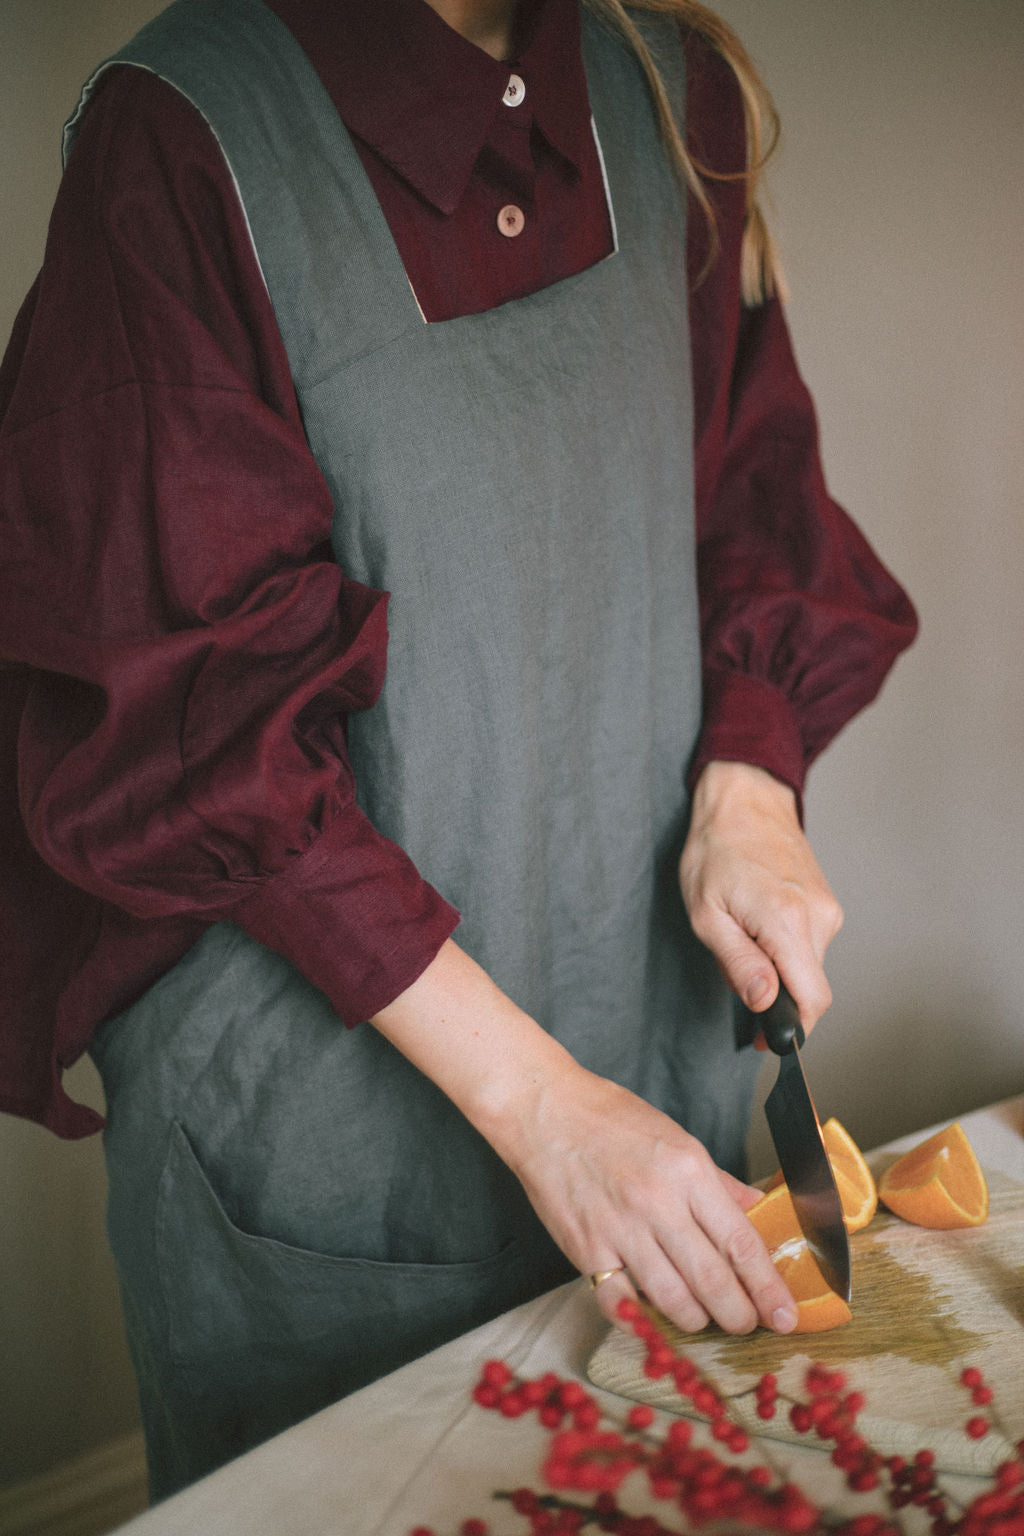 REVERSIBLE LINEN APRON | One of the most beautiful things about Christmas is the preparation of food, setting the table, pulling out all the stops for our friends and family at such a special time of year. We created this reversible cross - over apron to